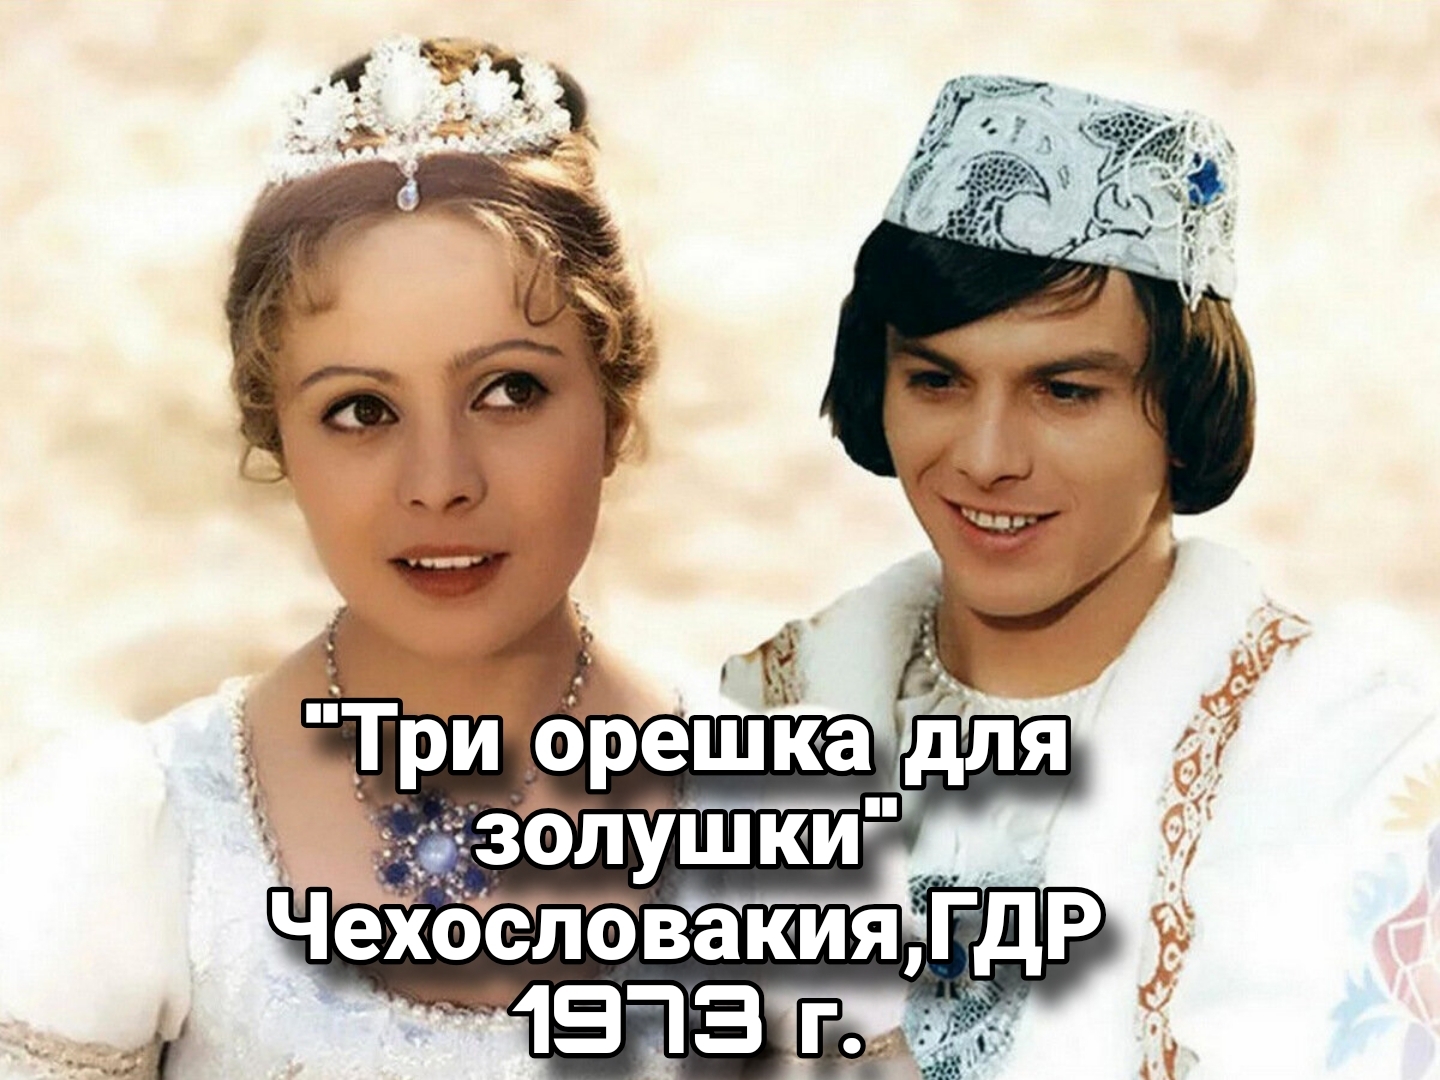 Some foreign children's films in our country in the 80s and the first half of the 90s - Children's fairy tales, Films of the 90s, Nostalgia, Childhood in the USSR, Longpost, Picture with text